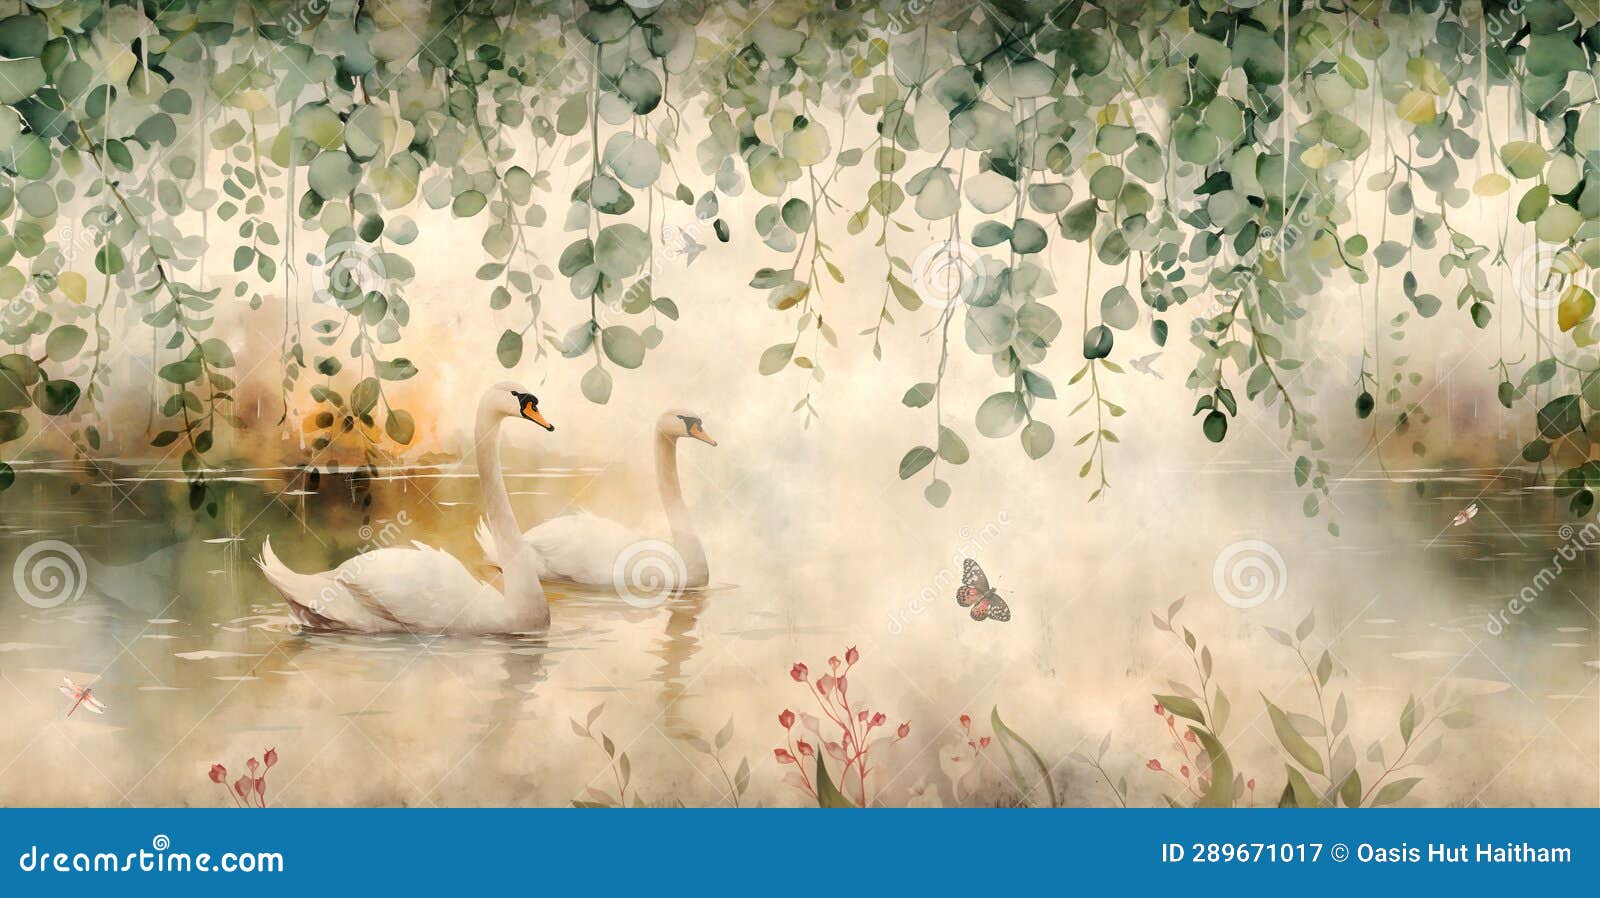 watercolor painting pattern of flowers surrounding the lake with a pair of white geese in vintage style for wall painting